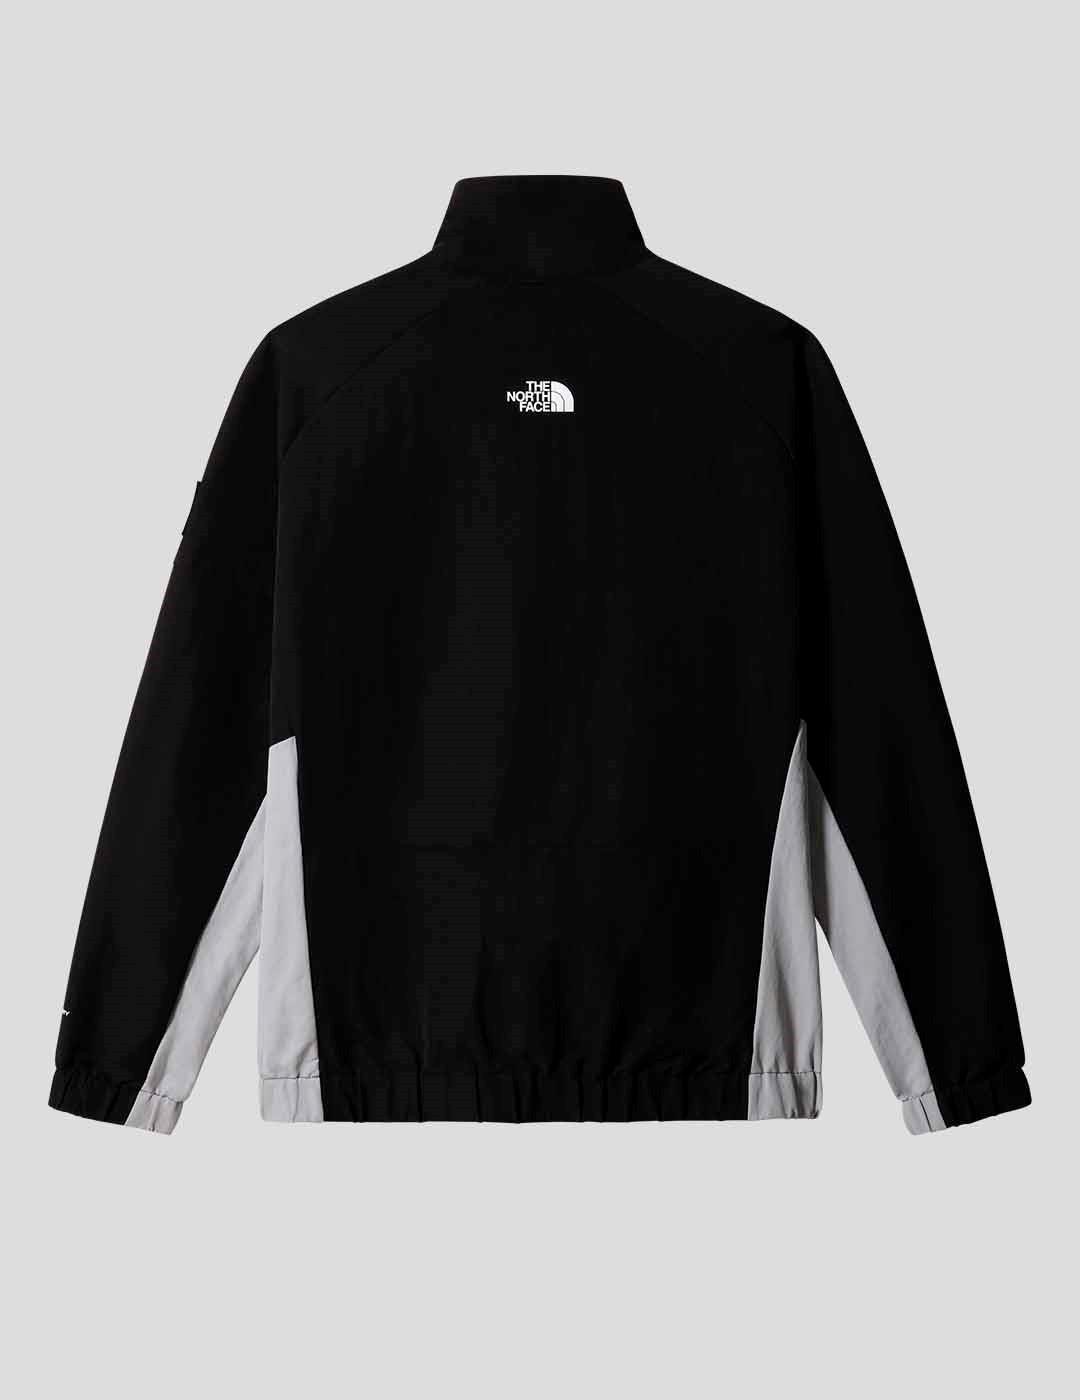 CHAQUETA THE NORTH FACE PHLEGO TRACK TOP  TNF BLACK-MELD GREY